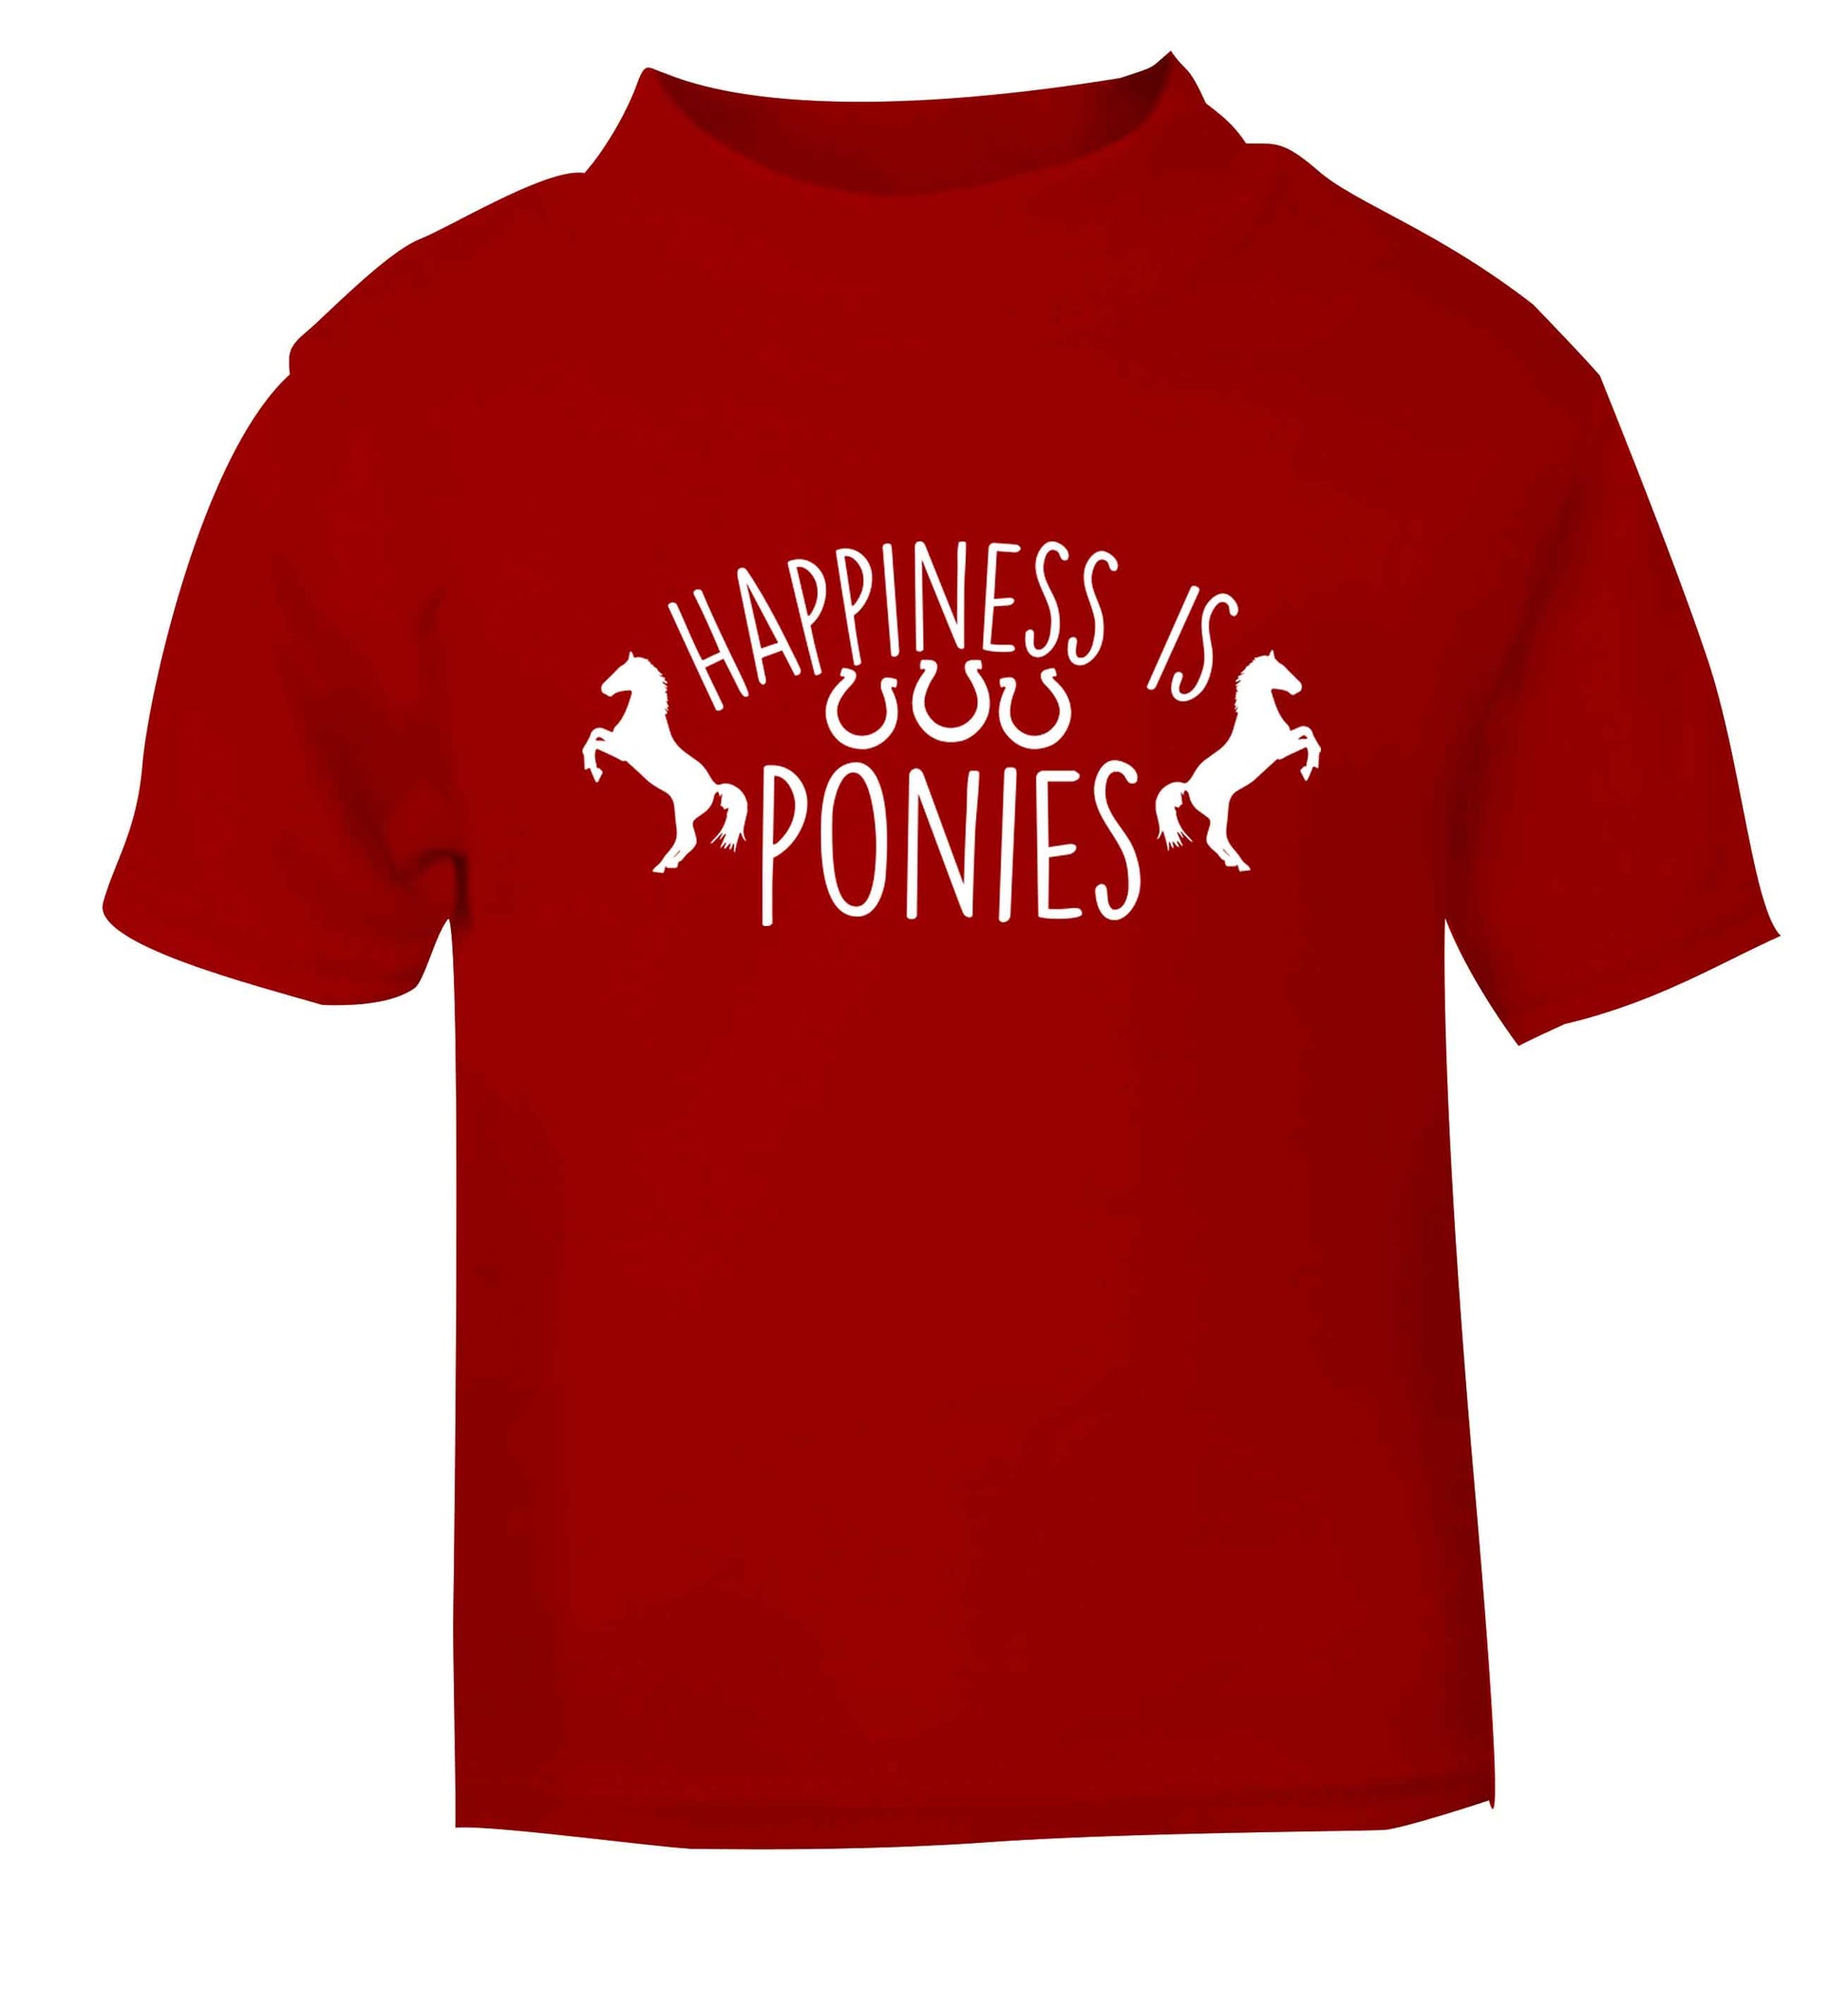 Happiness is ponies red baby toddler Tshirt 2 Years